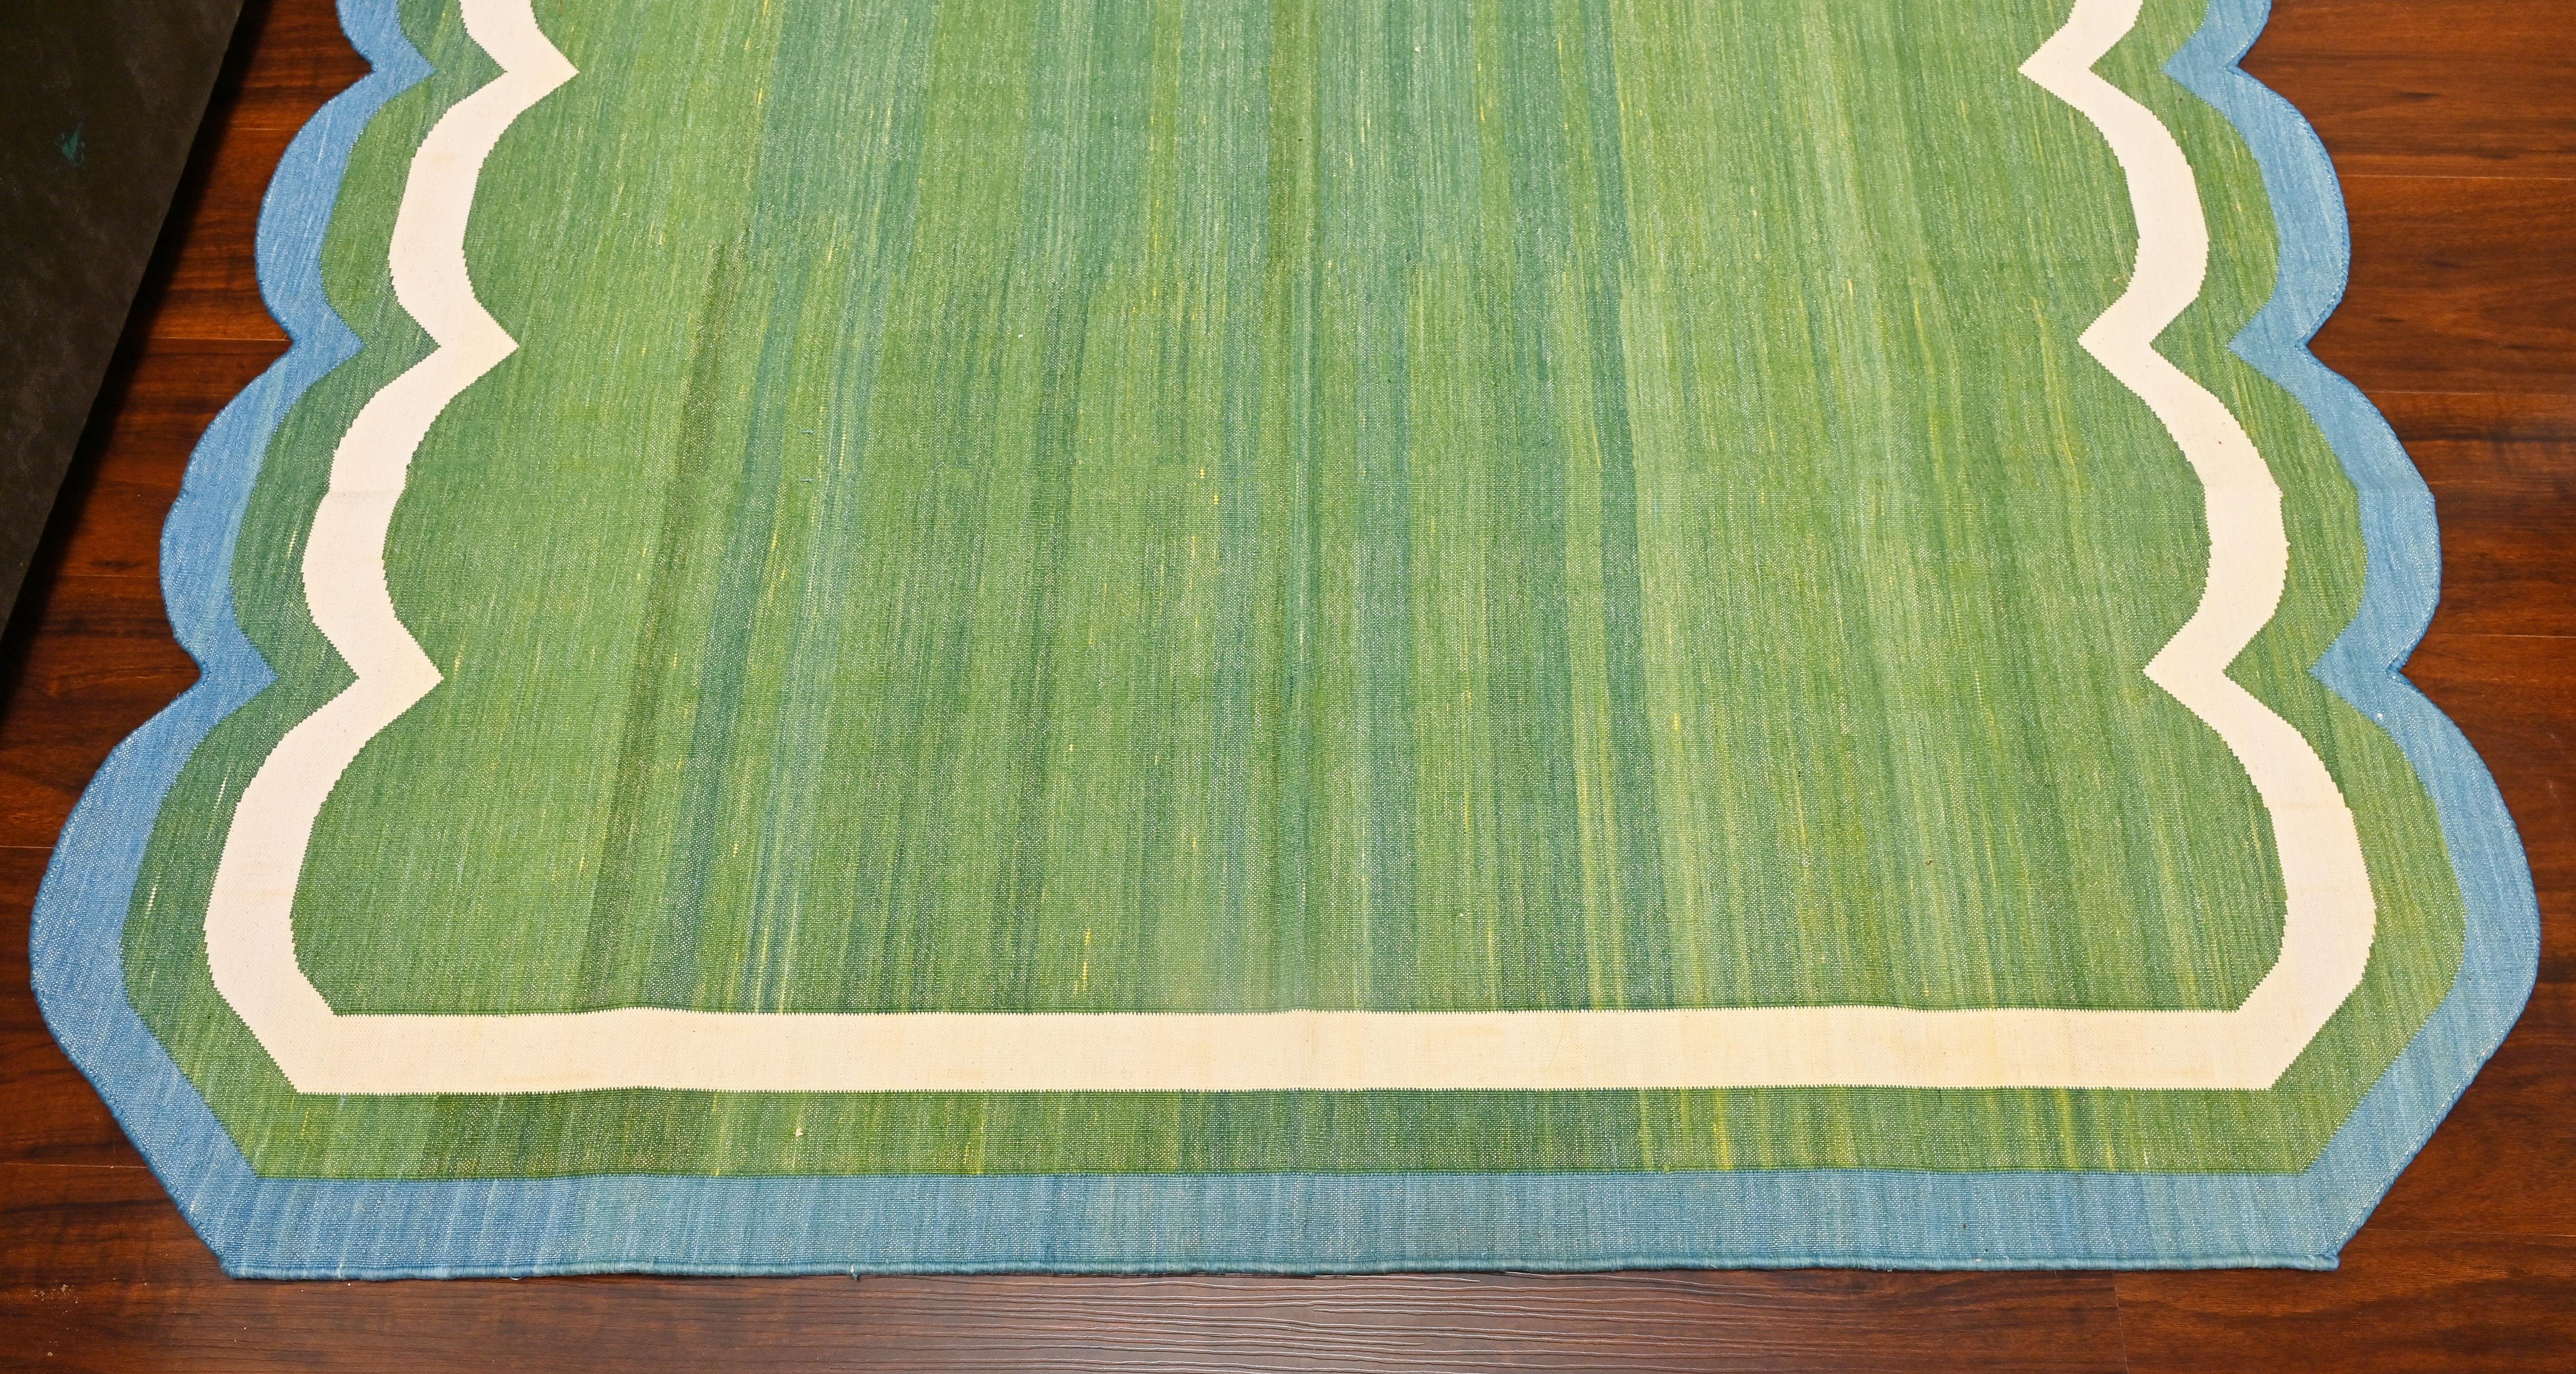 Handmade Cotton Area Flat Weave Rug, 5x8 Green And Blue Scalloped Kilim Dhurrie For Sale 2